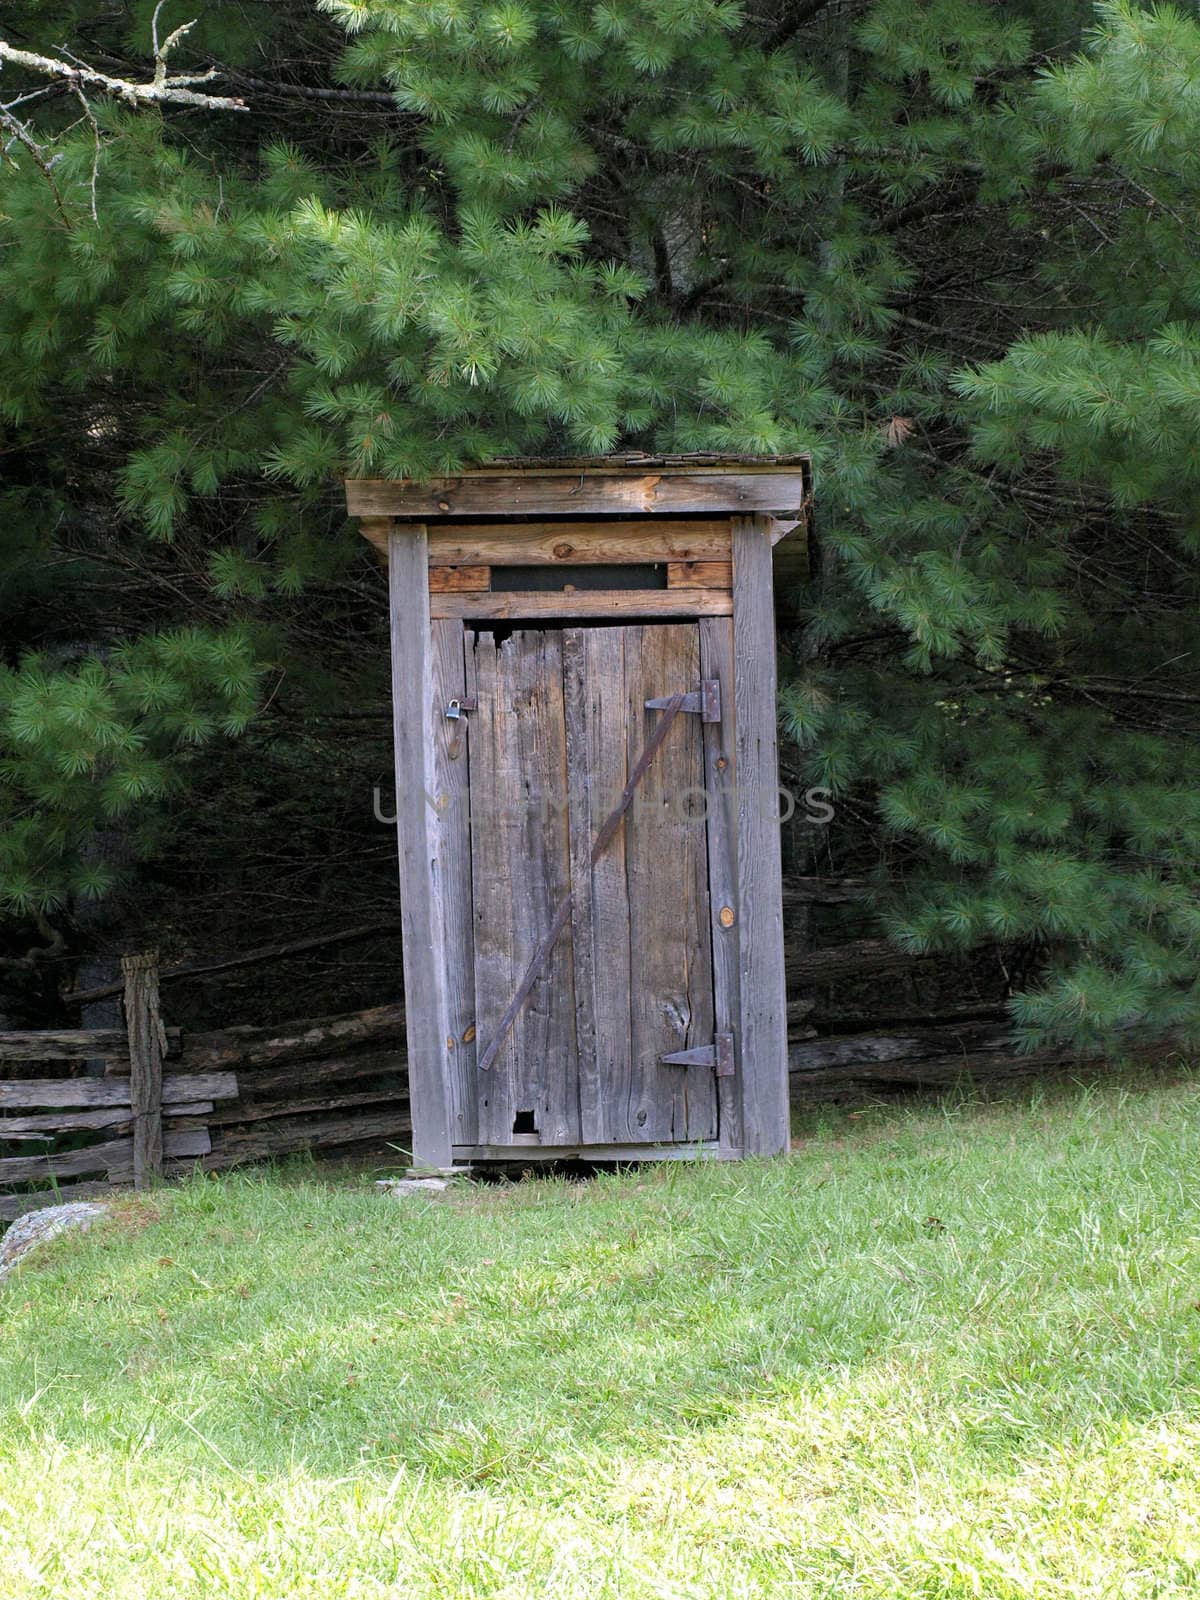 Old wooden outhouse on a rural farm